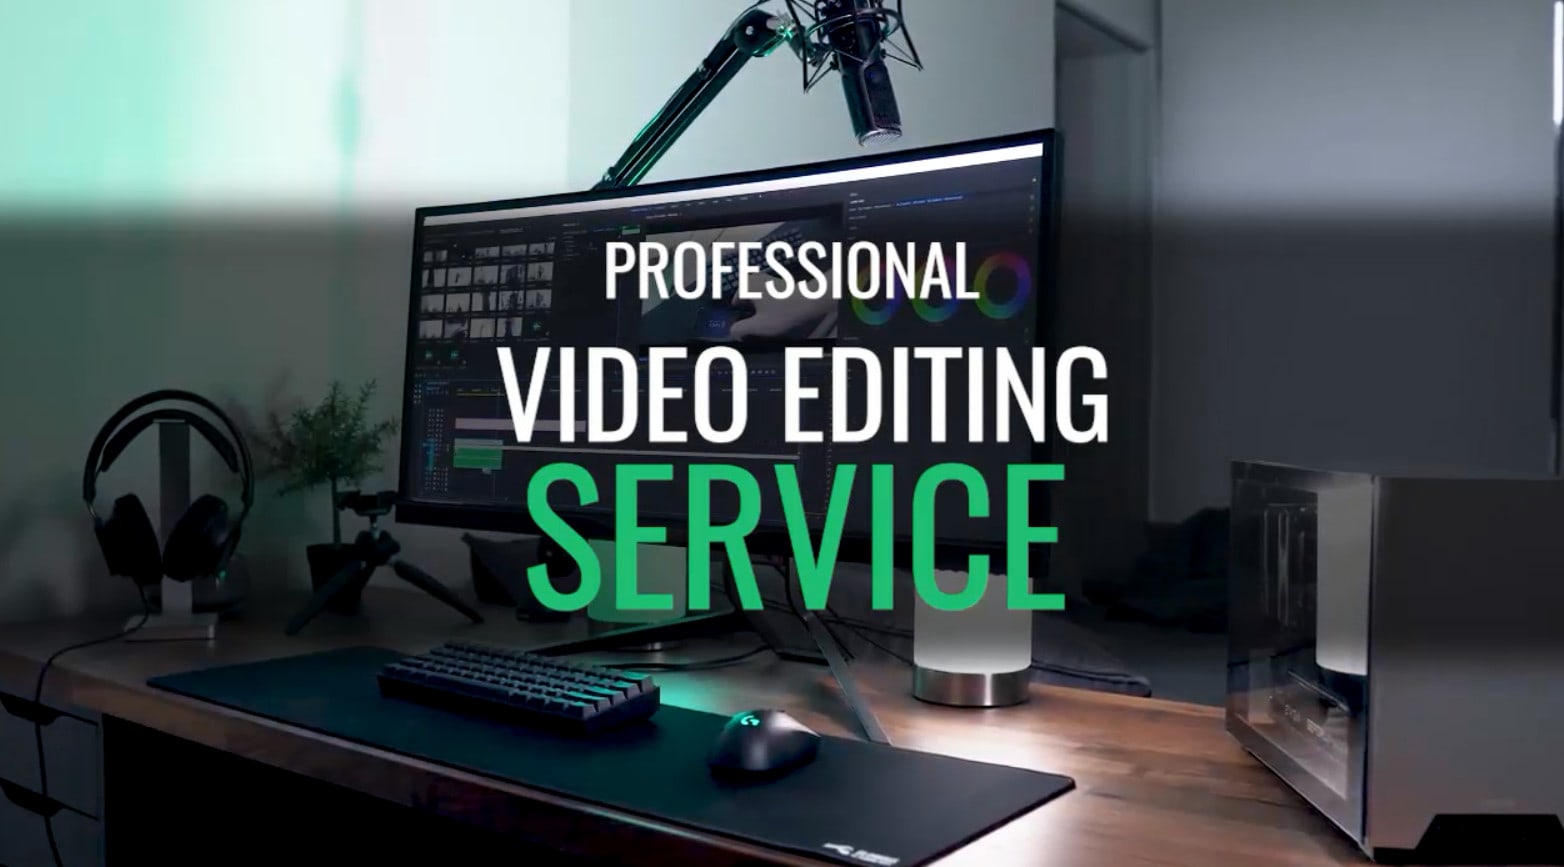 Professionally edit your video quick and fast